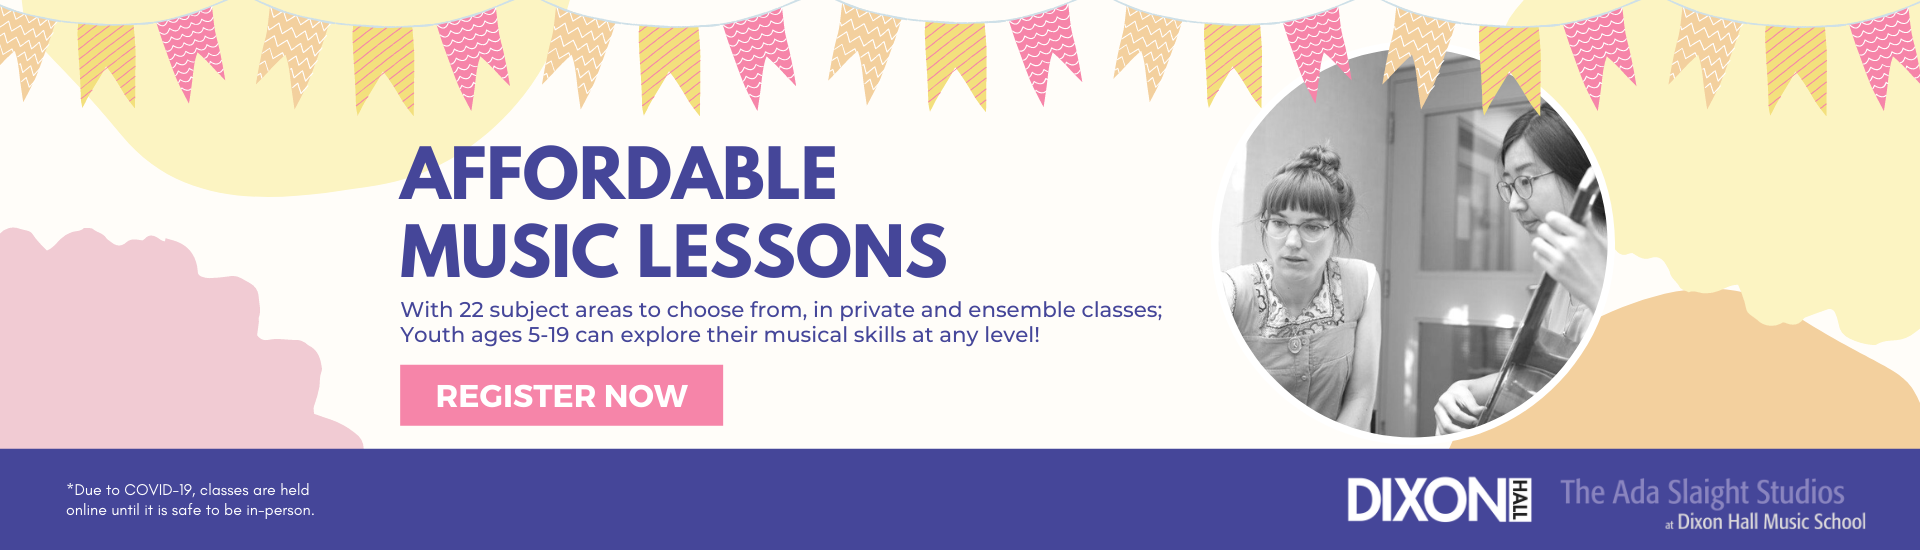 Affordable Music Lessons